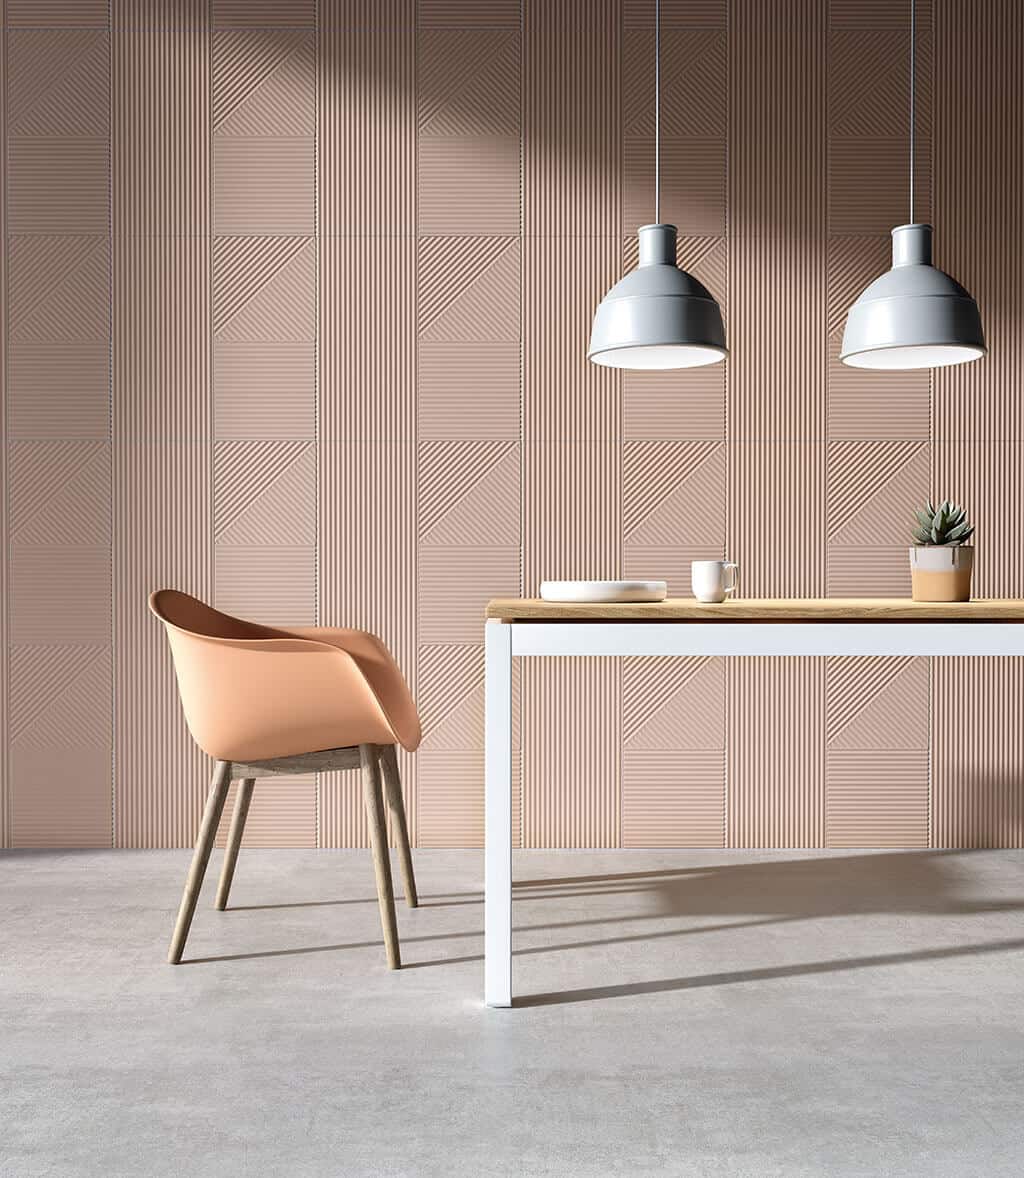 Linea textured wall tiles from European Heritage with a dining table and chair in front and two lights suspended above